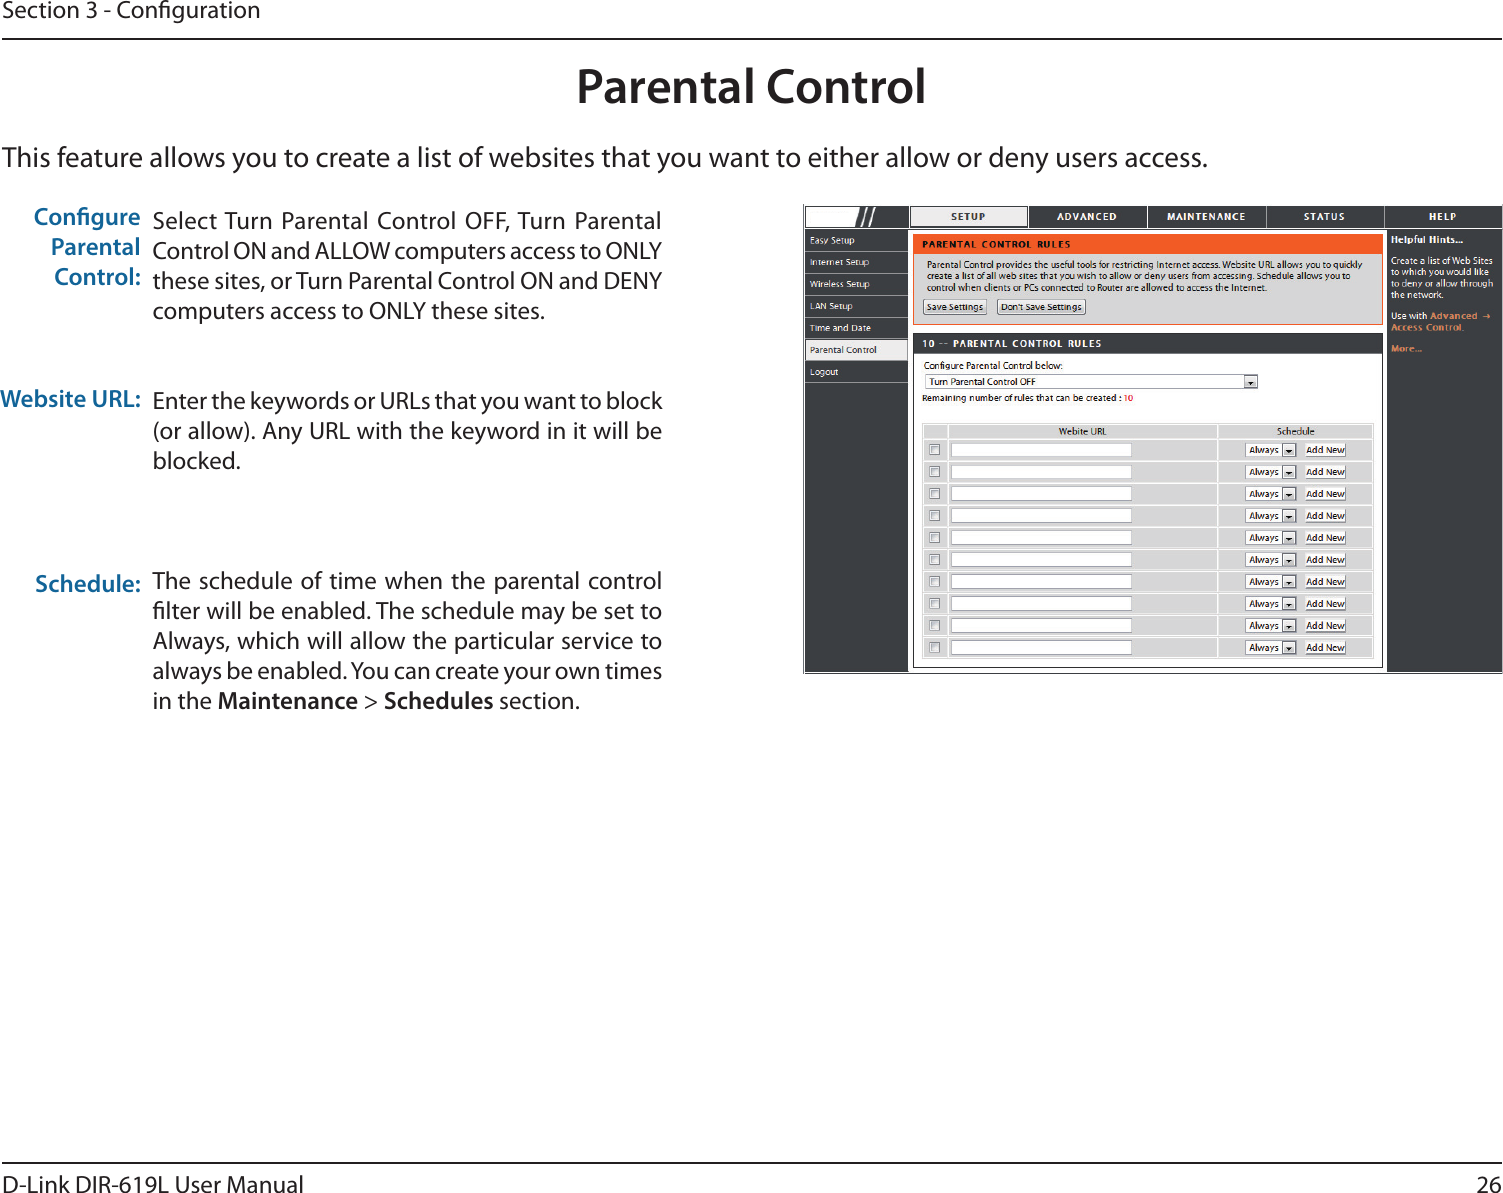 26D-Link DIR-619L User ManualSection 3 - CongurationThis feature allows you to create a list of websites that you want to either allow or deny users access.Parental ControlSelect Turn  Parental Control  OFF, Turn  Parental Control ON and ALLOW computers access to ONLY these sites, or Turn Parental Control ON and DENY computers access to ONLY these sites.Enter the keywords or URLs that you want to block (or allow). Any URL with the keyword in it will be blocked.The schedule of time when  the parental control lter will be enabled. The schedule may be set to Always, which will allow the particular service to always be enabled. You can create your own times in the Maintenance &gt; Schedules section.Congure Parental Control:Website URL:Schedule:DIR-619L